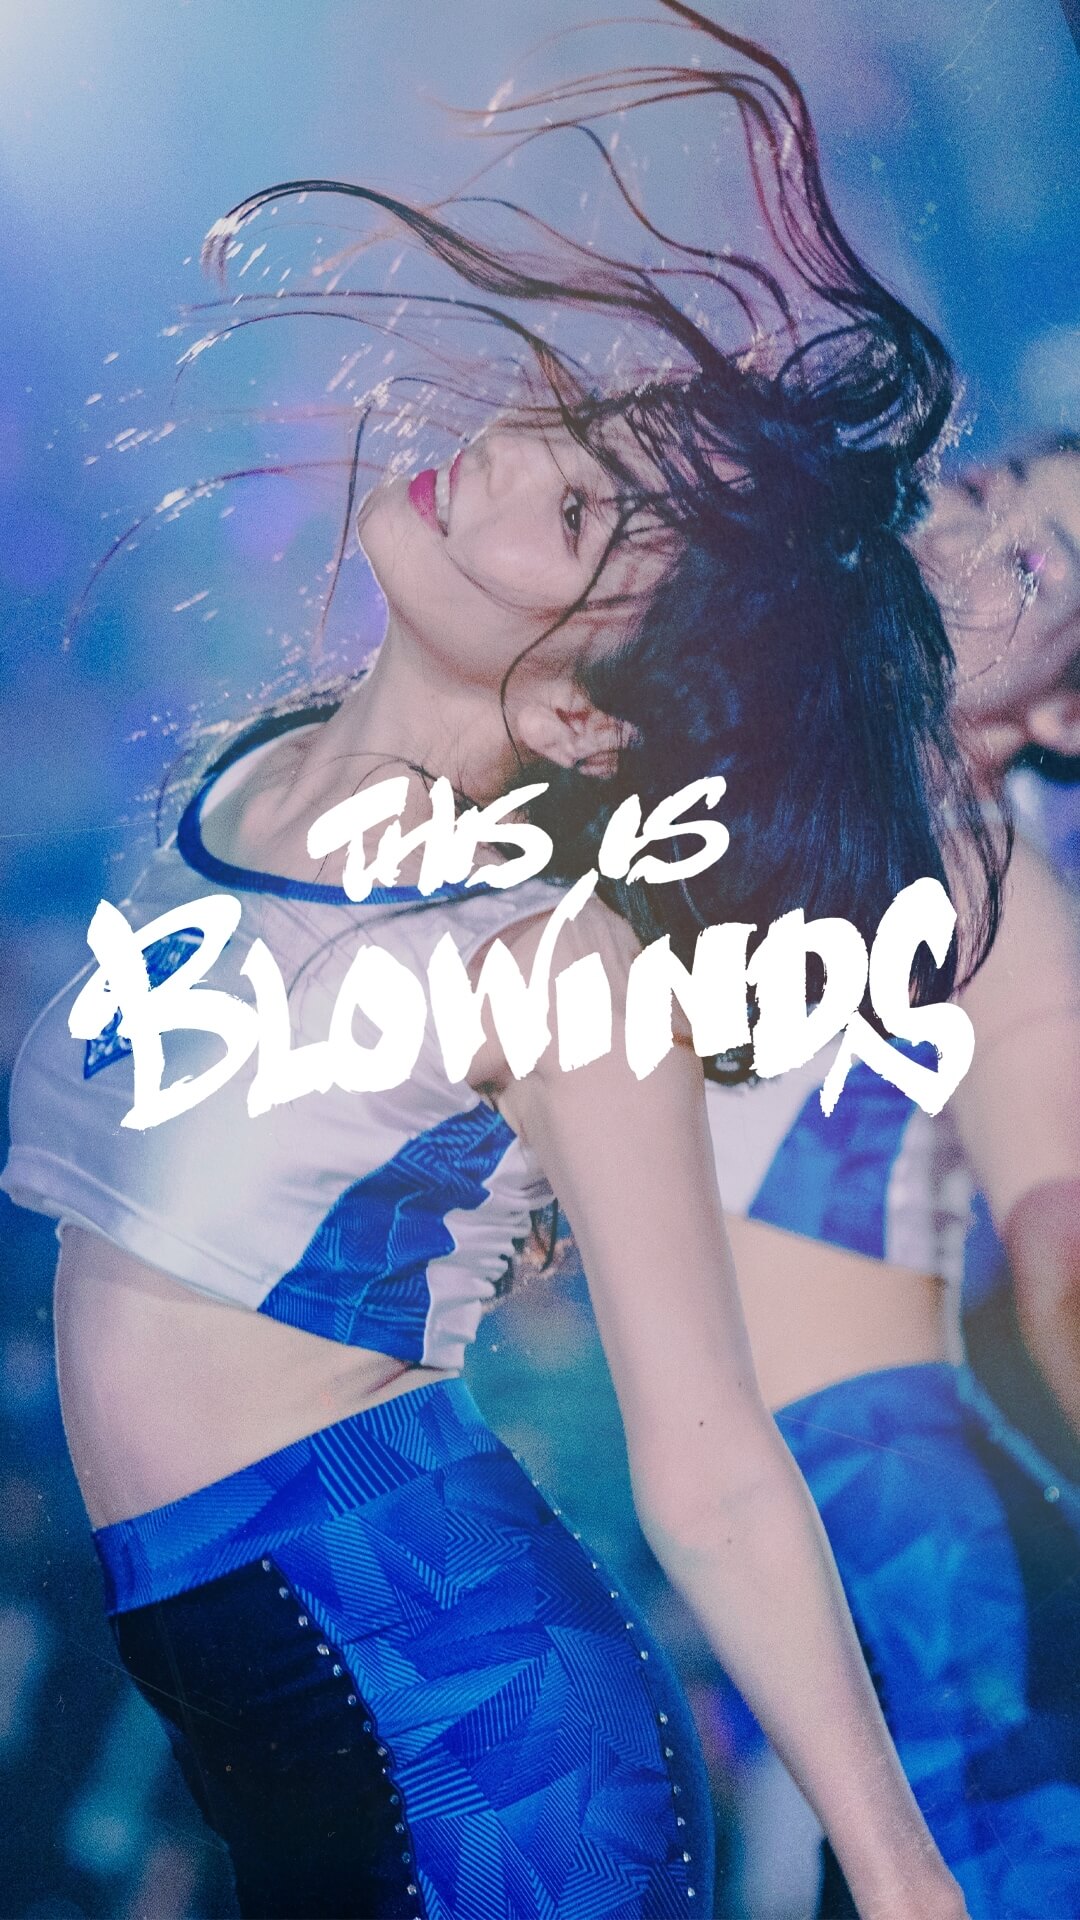 THIS IS BLOWINDS.